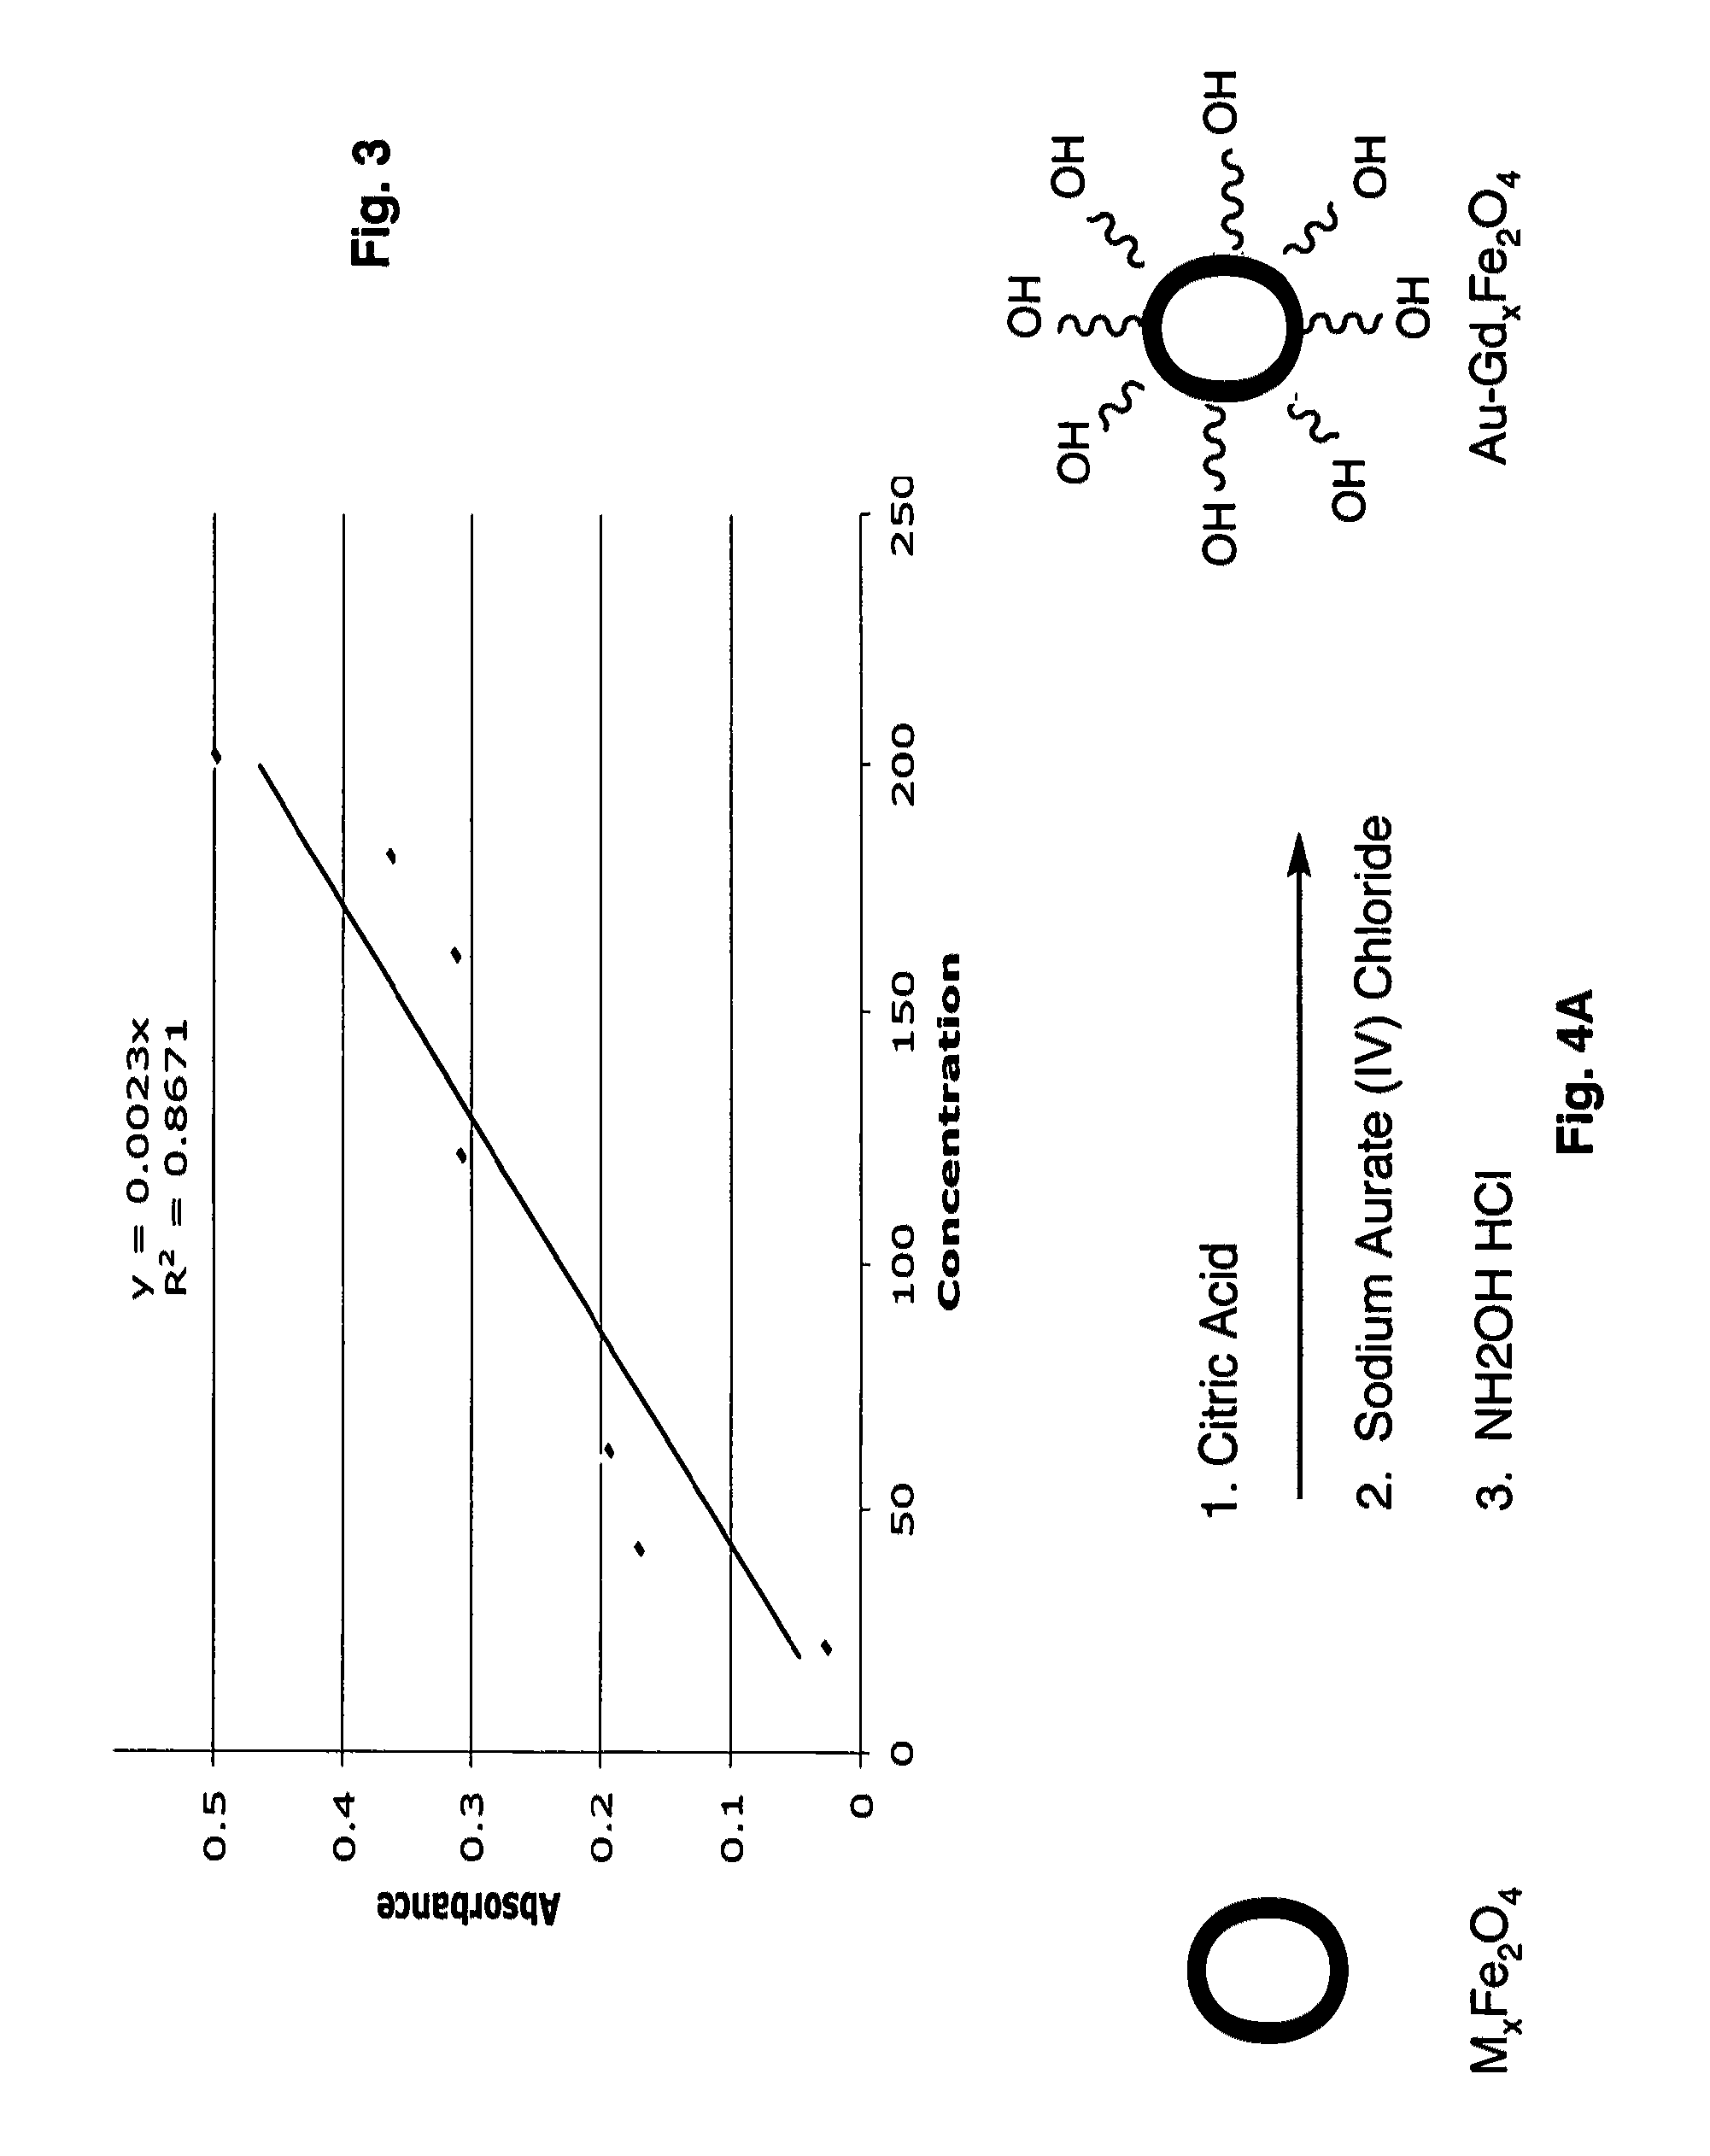 Ultrasmall superparamagnetic iron oxide nanoparticles and uses thereof